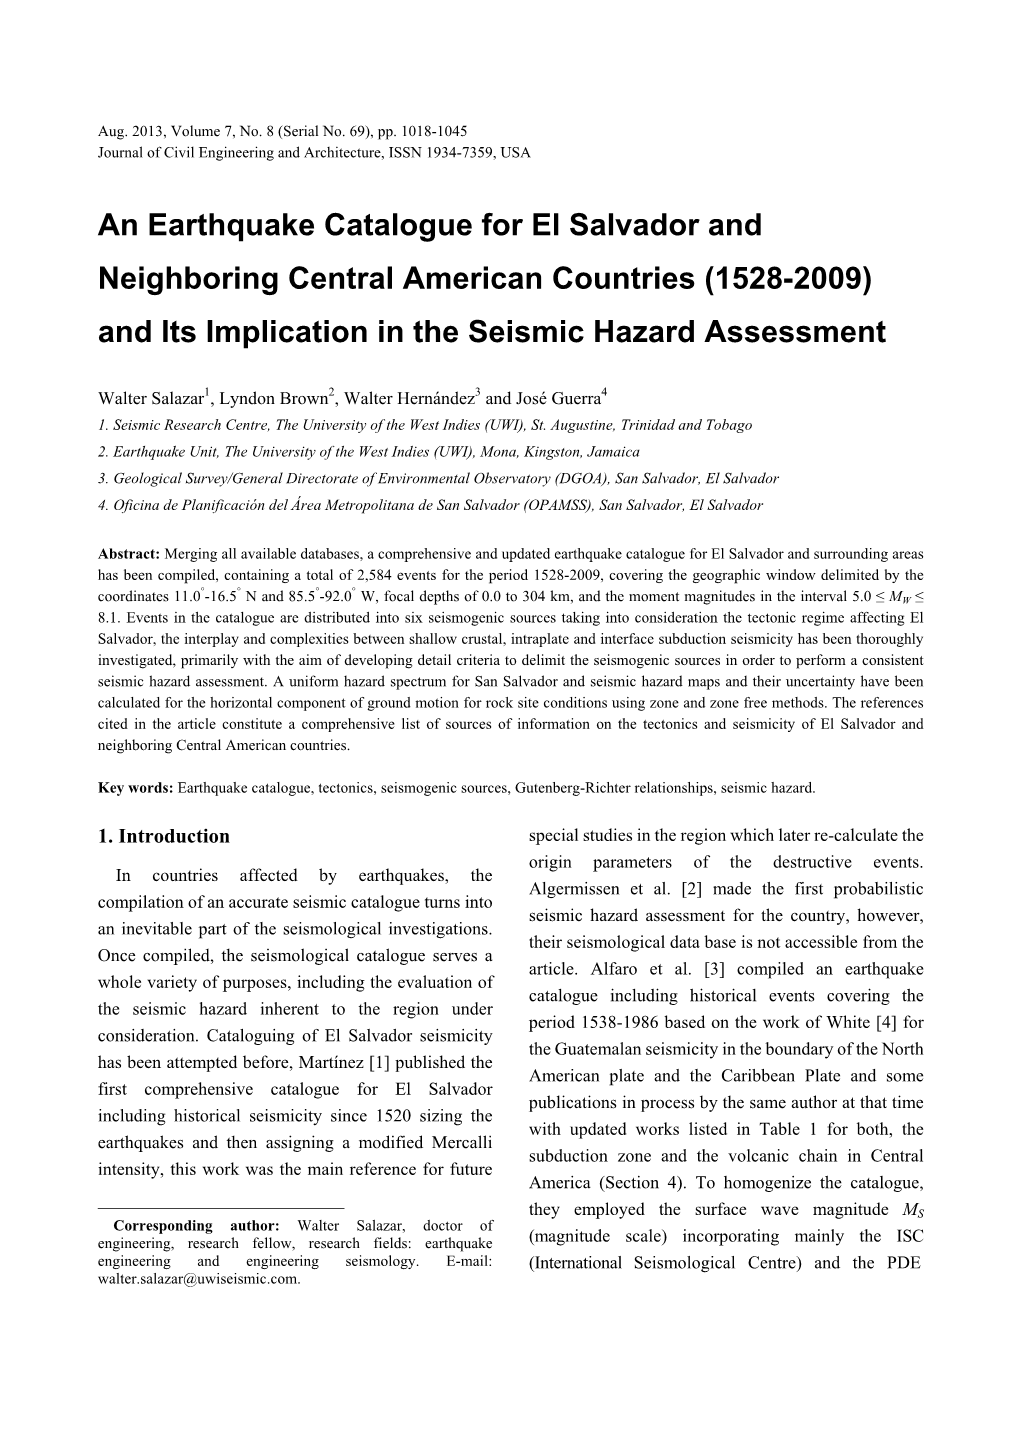 An Earthquake Catalogue for El Salvador and Neighboring Central American Countries (1528-2009) and Its Implication in the Seismic Hazard Assessment